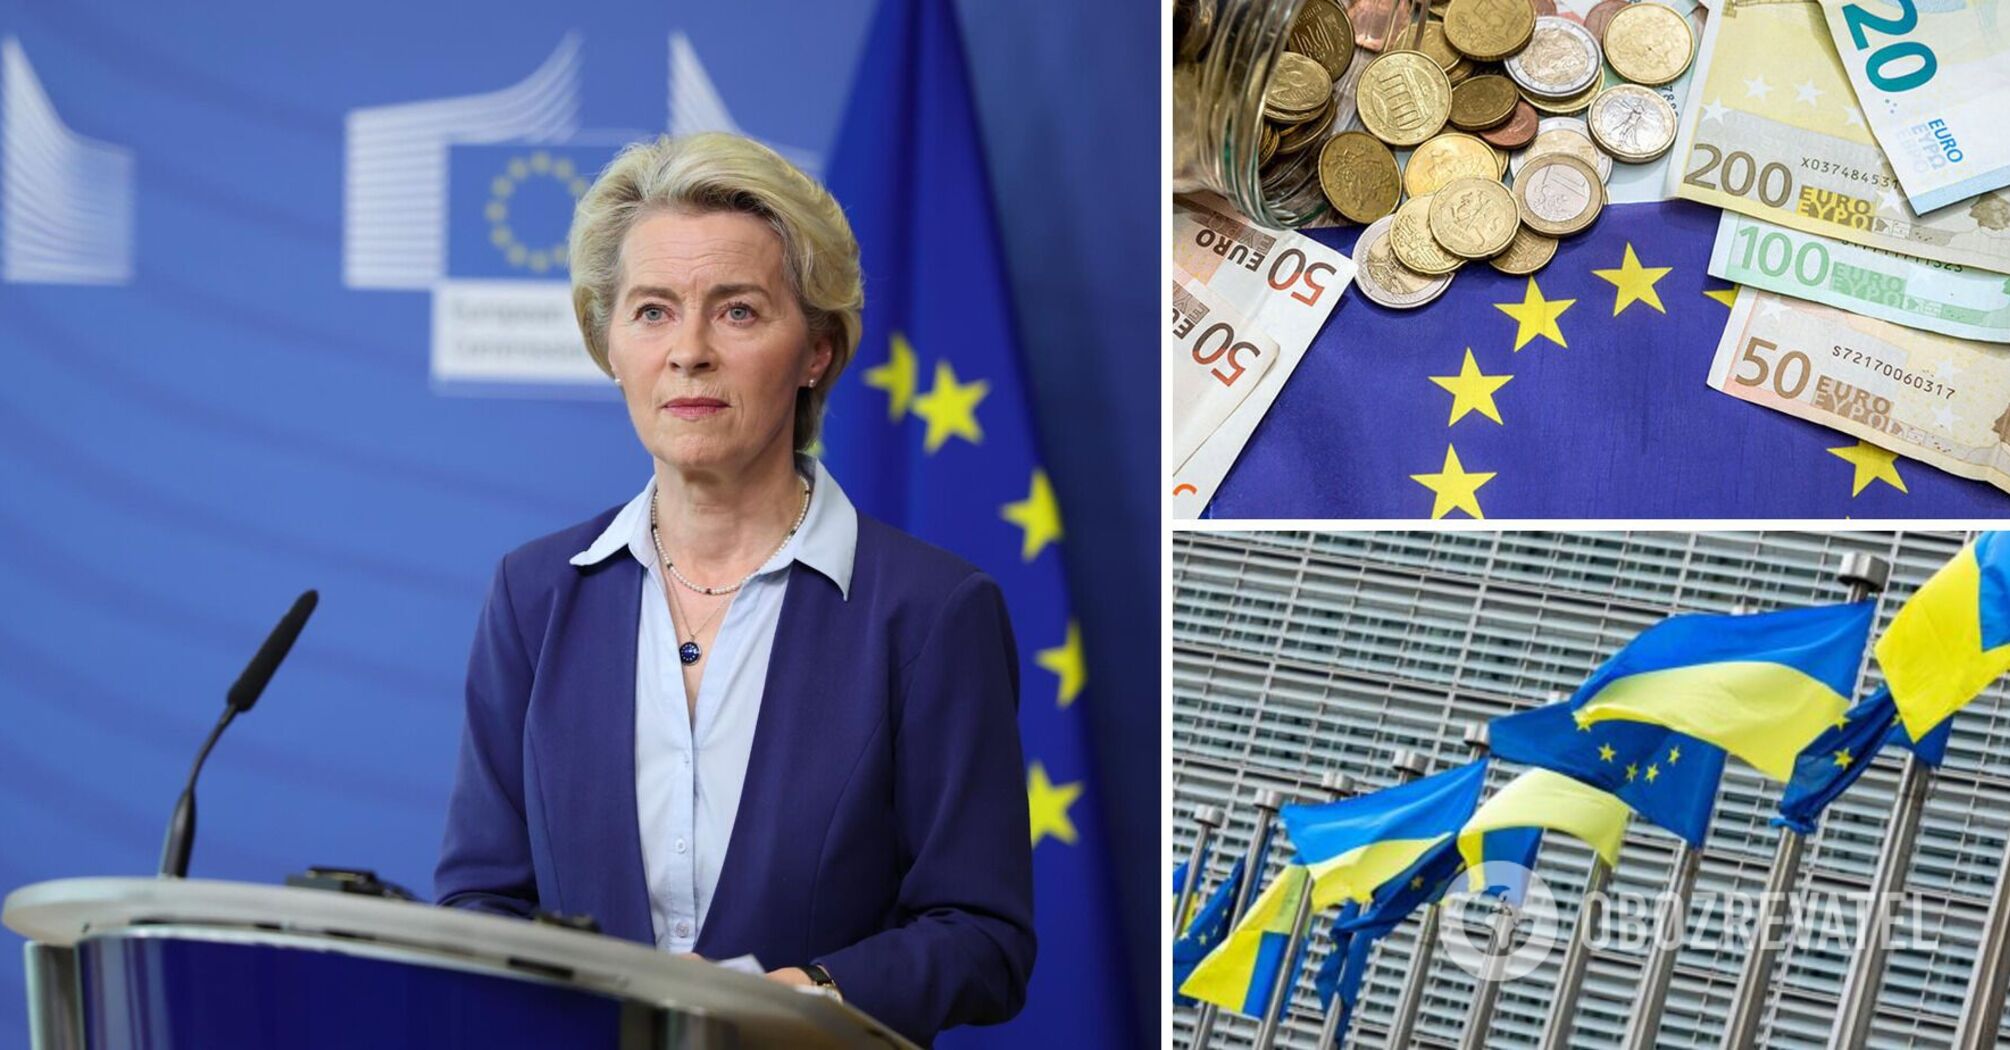 The EU has prepared another tranche of aid to Ukraine